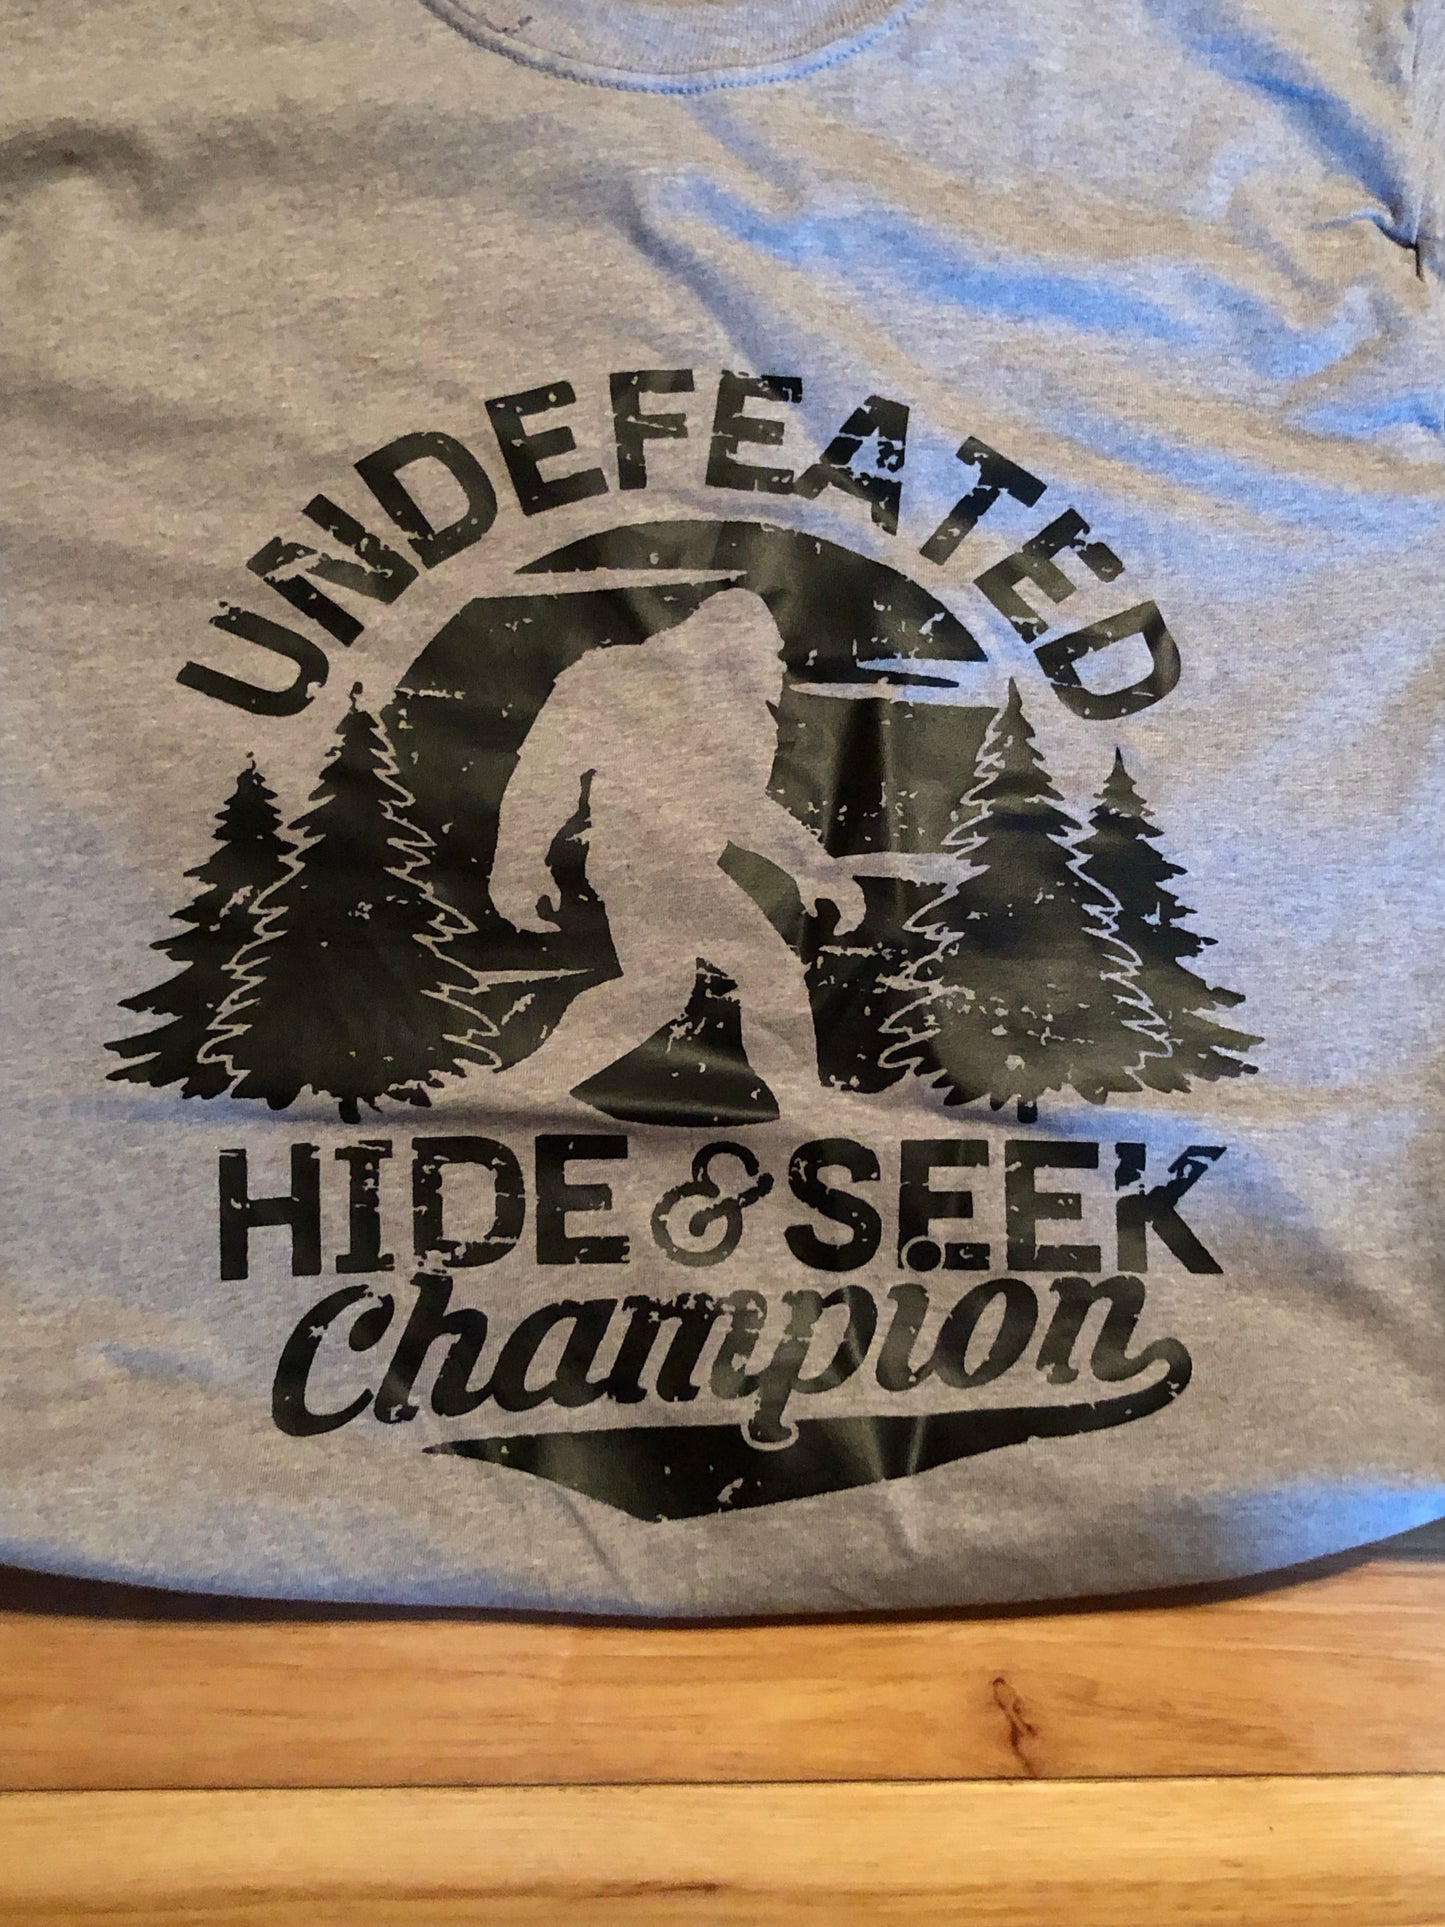 Undefeated Hide and Seek Champion Big Foot Sasquatch t-shirt